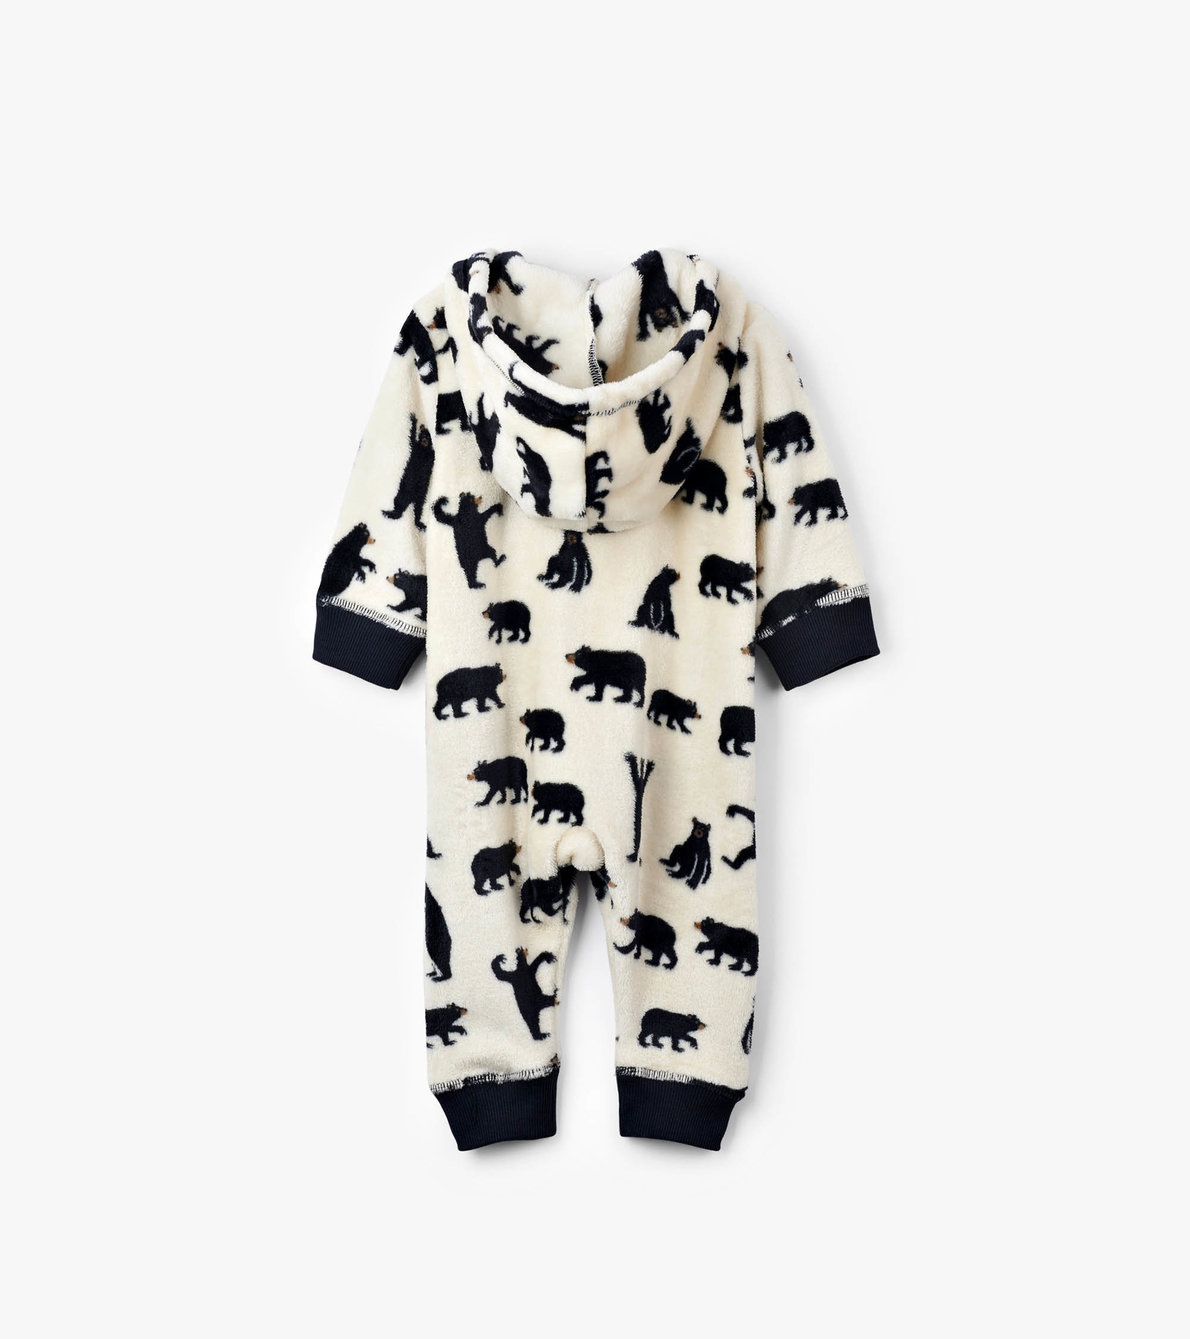 View larger image of Baby Black Bears Hooded Fleece Jumpsuit